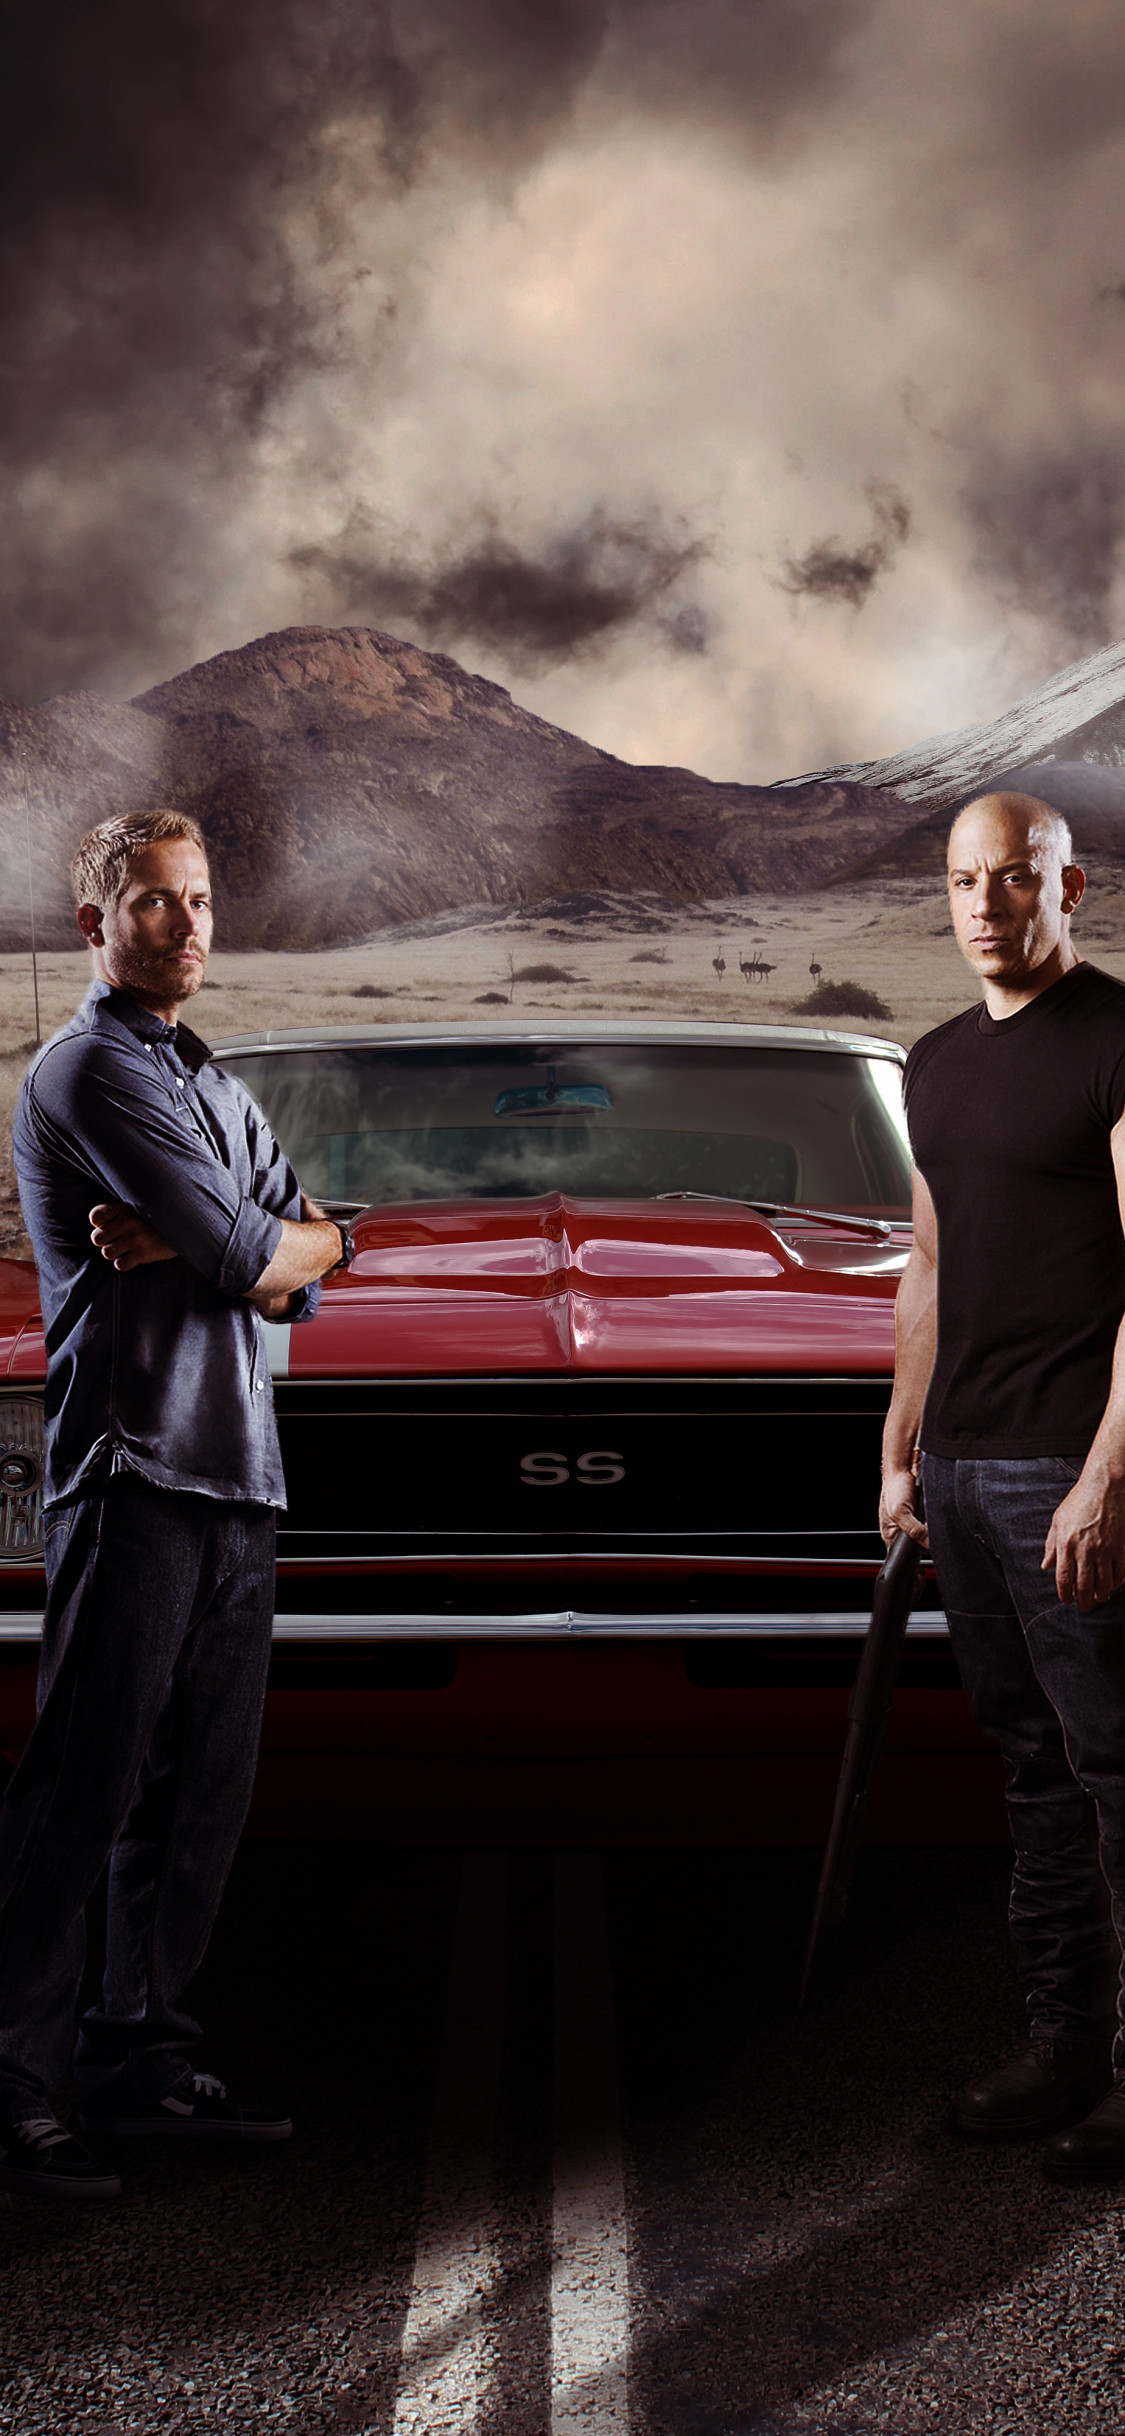 Fast And Furious 7 Wallpaper (best Fast And Furious 7 Wallpaper and image) on WallpaperChat